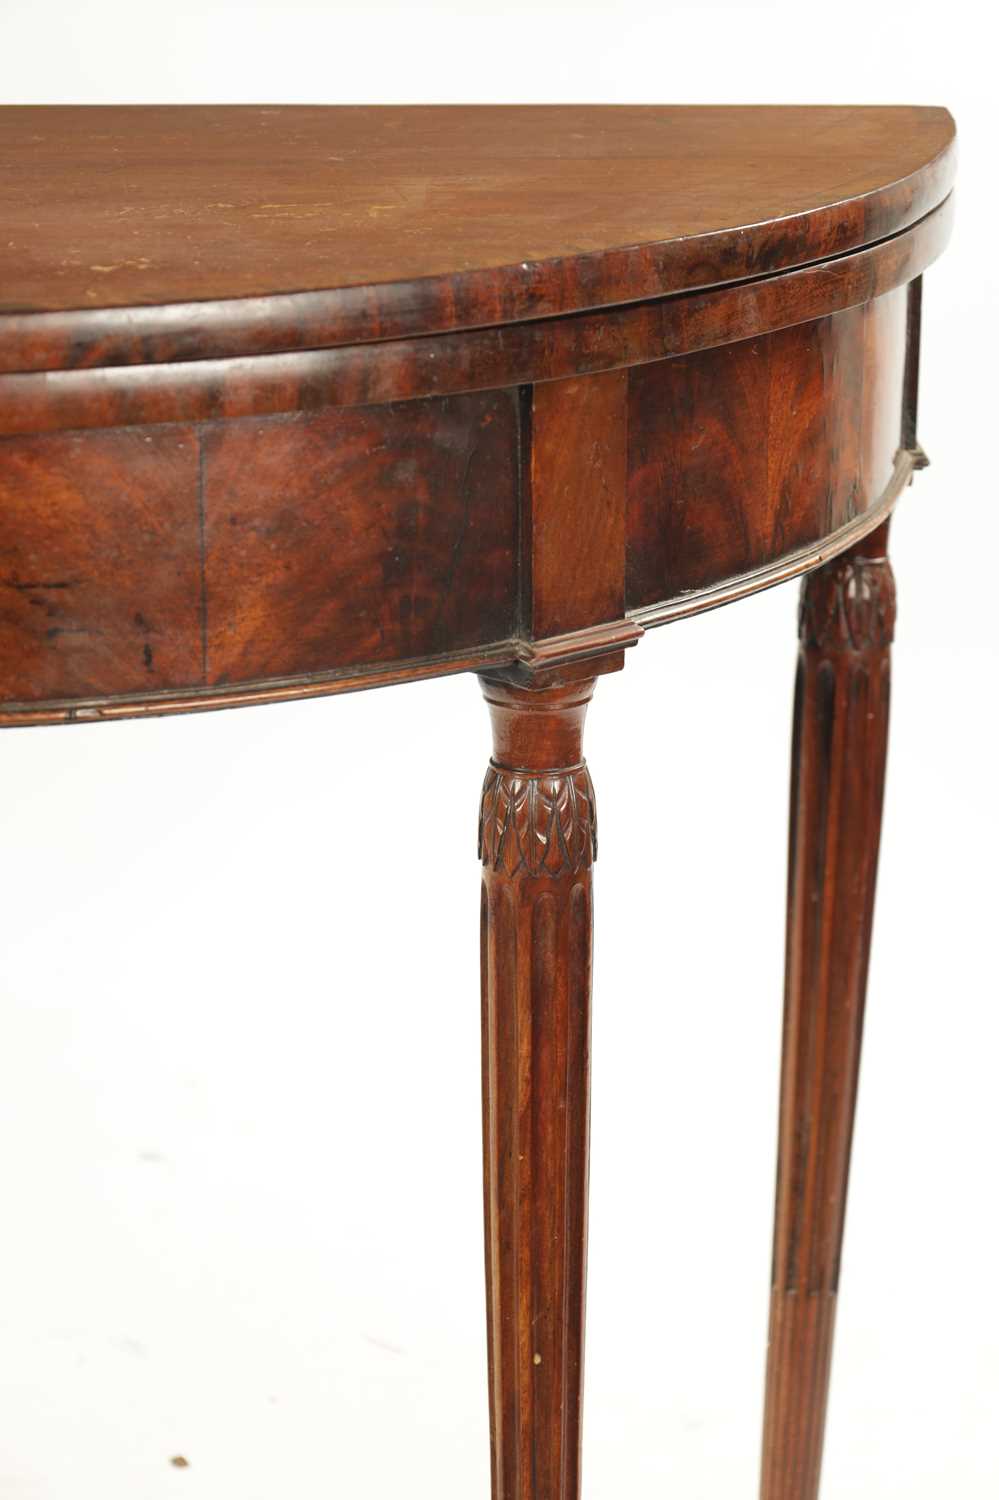 A LATE 18TH CENTURY DEMI LUNE CARD TABLE ON FLUTED LEGS IN THE MANNER OF GILLOWS - Image 4 of 7